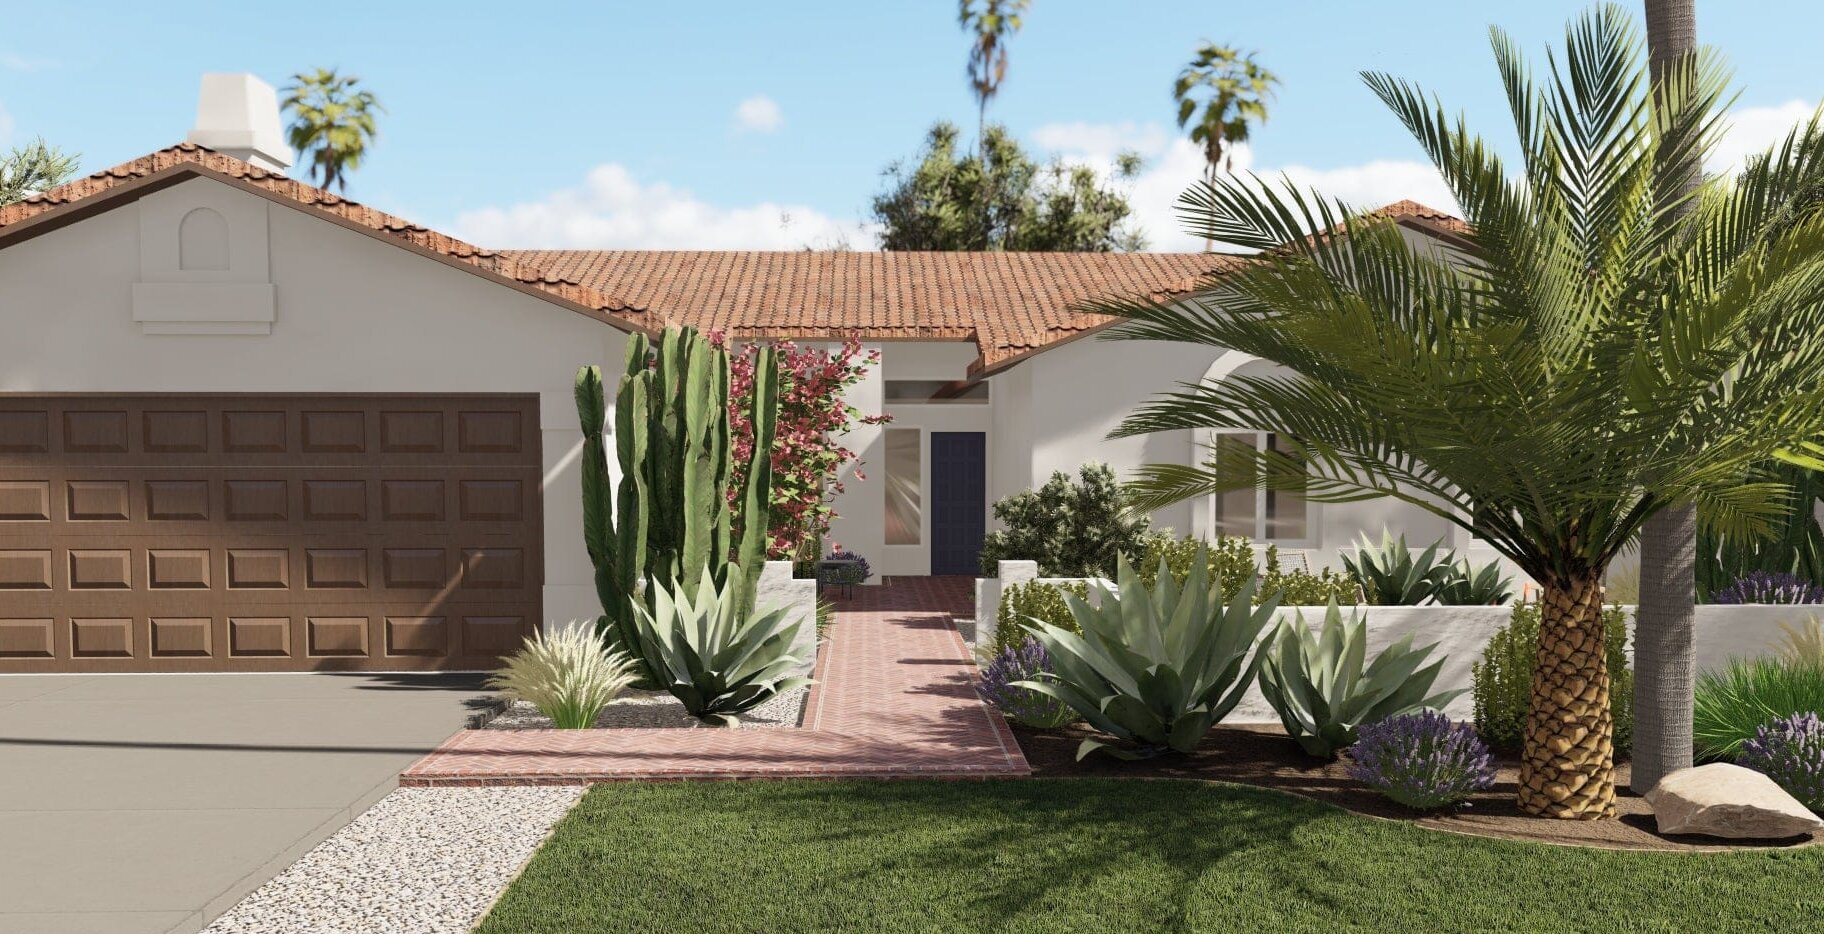 Yardzen 3D render of front yard design with large succulent garden and walled patio